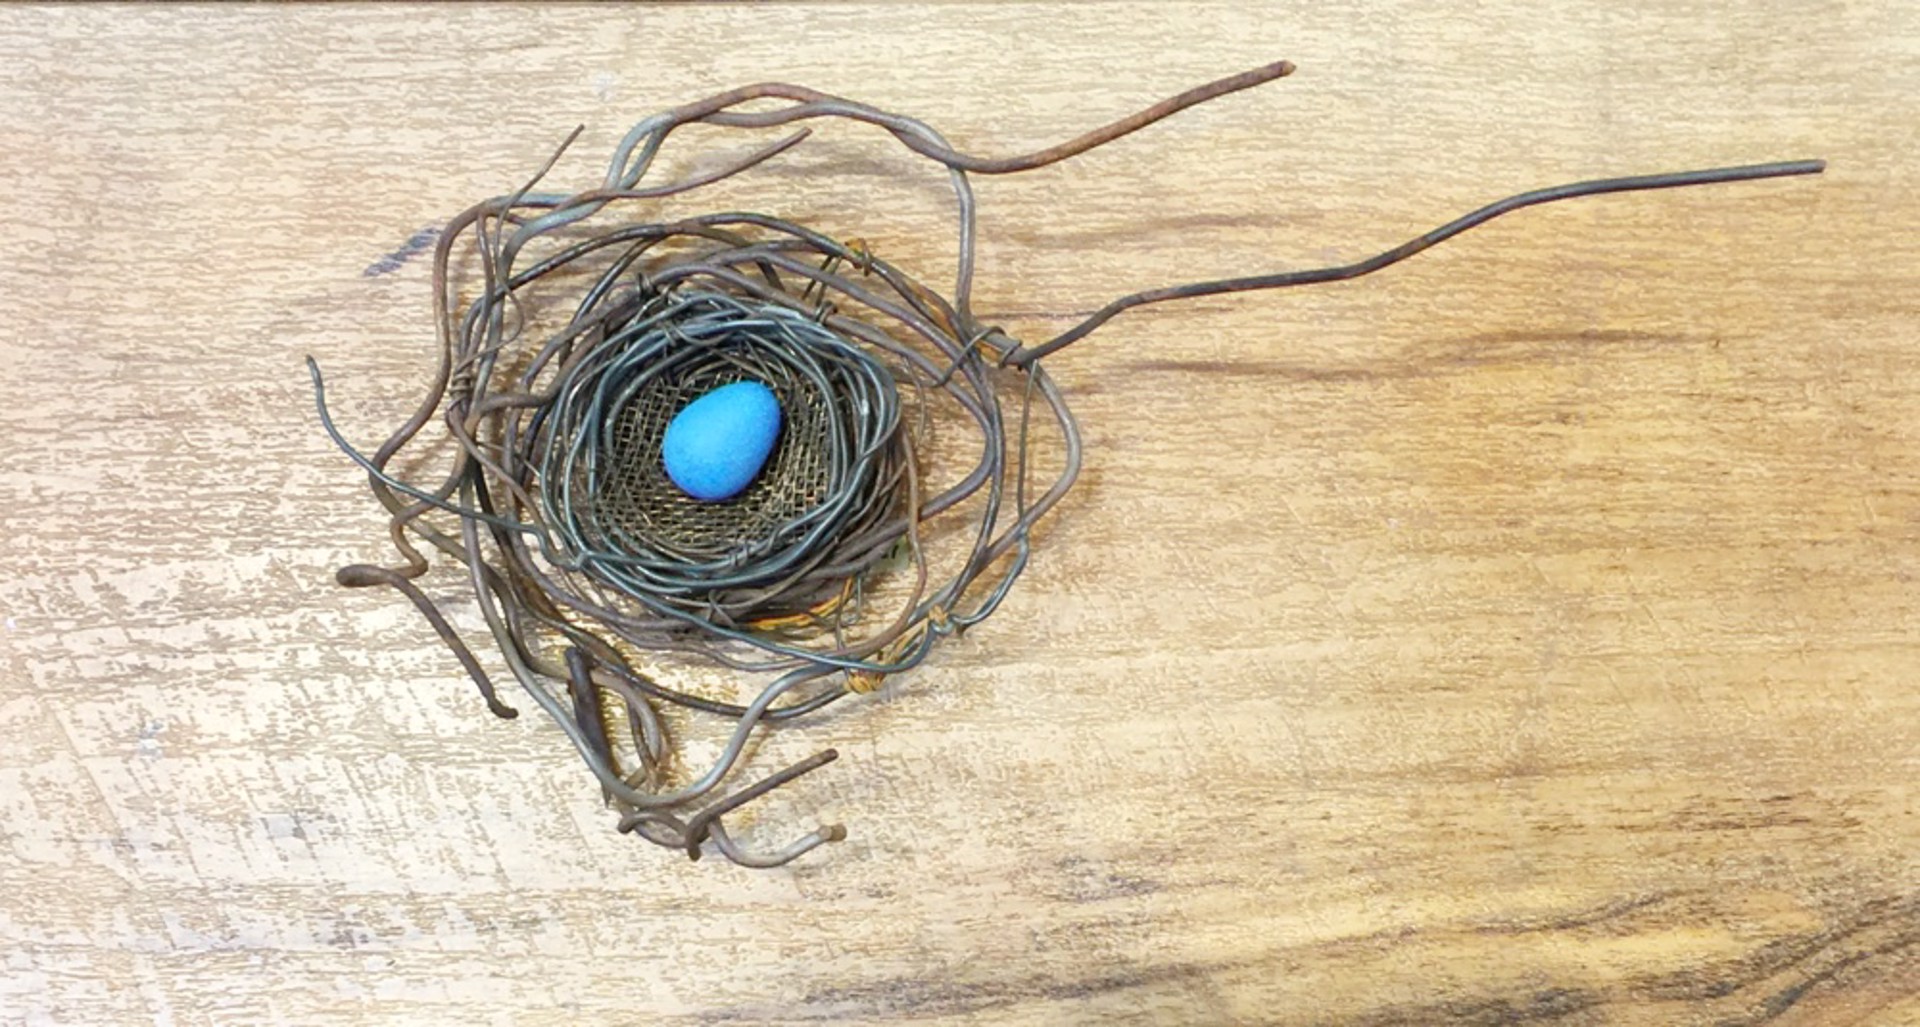 Hand Woven Wire Nest With 1 Blue Ceramic Eggs - 1308 by Phil Lichtenhan